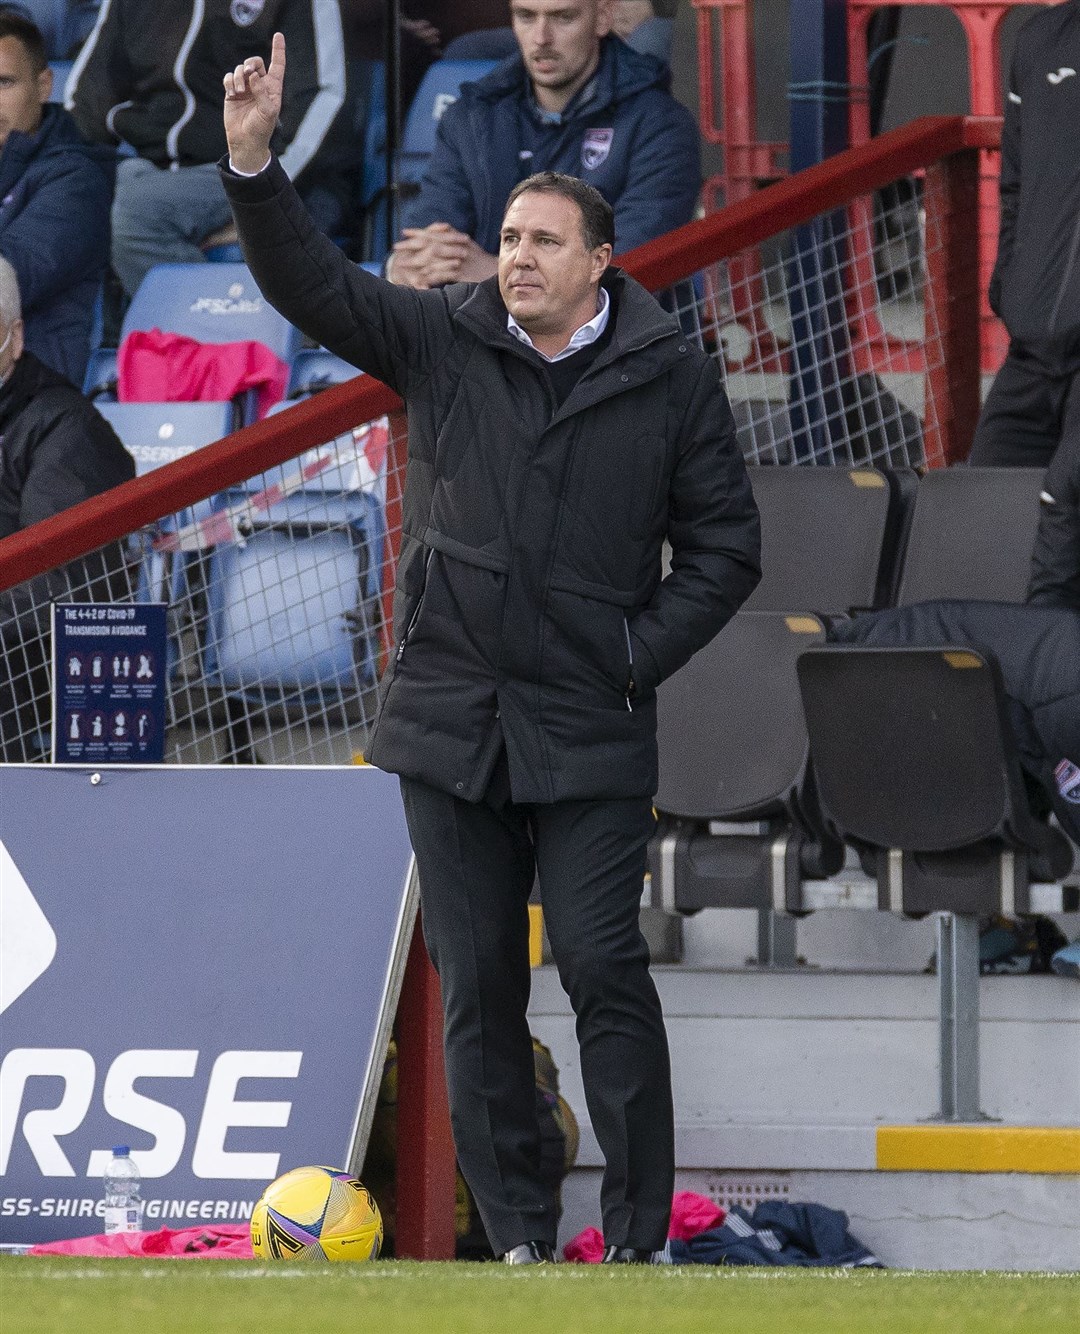 Picture - Ken Macpherson, Inverness. Ross County(2) v St.Mirren(3). 16.10.21. Ross County manager Malky Mackay.